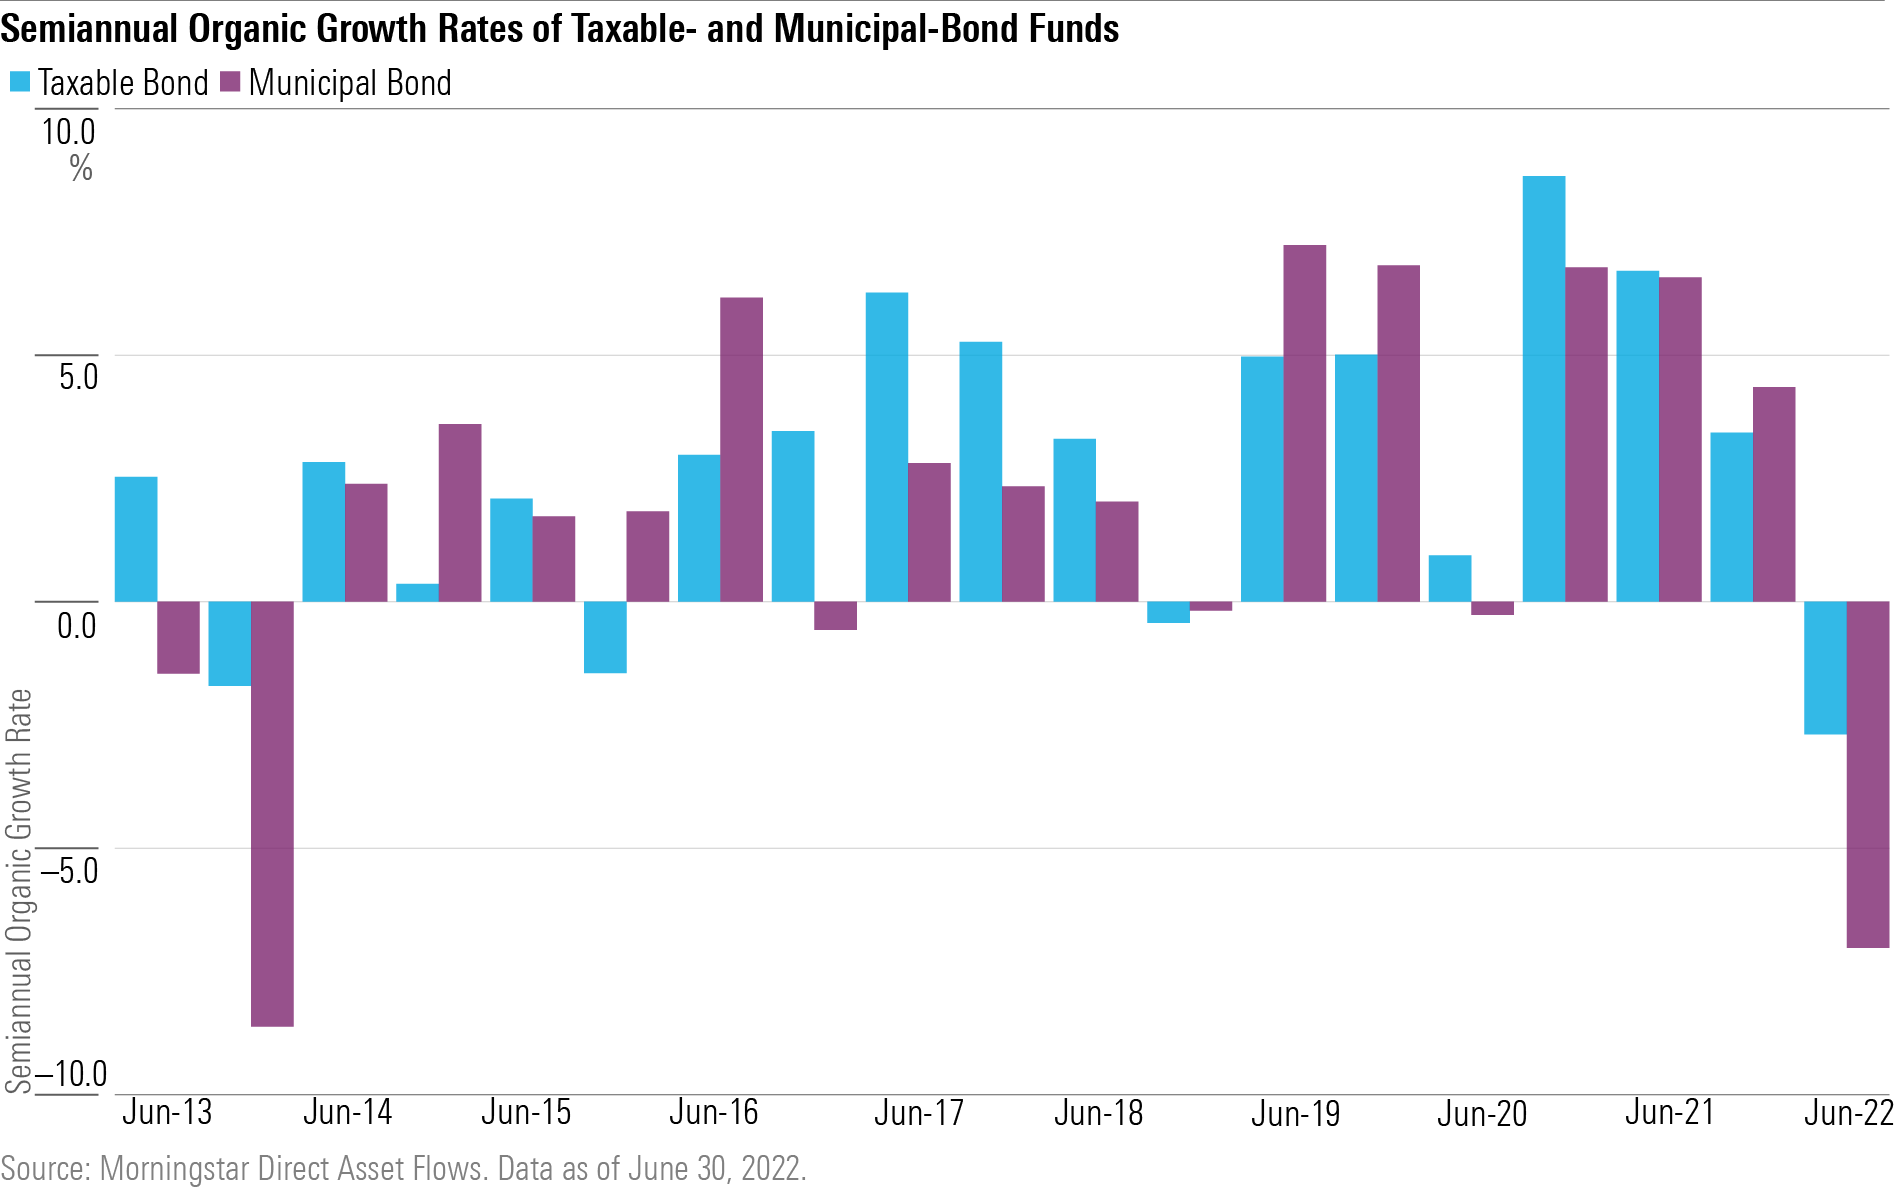 A bar chart swhowing that both taxable- and municipal-bond funds had outflows in the first half of 2022.